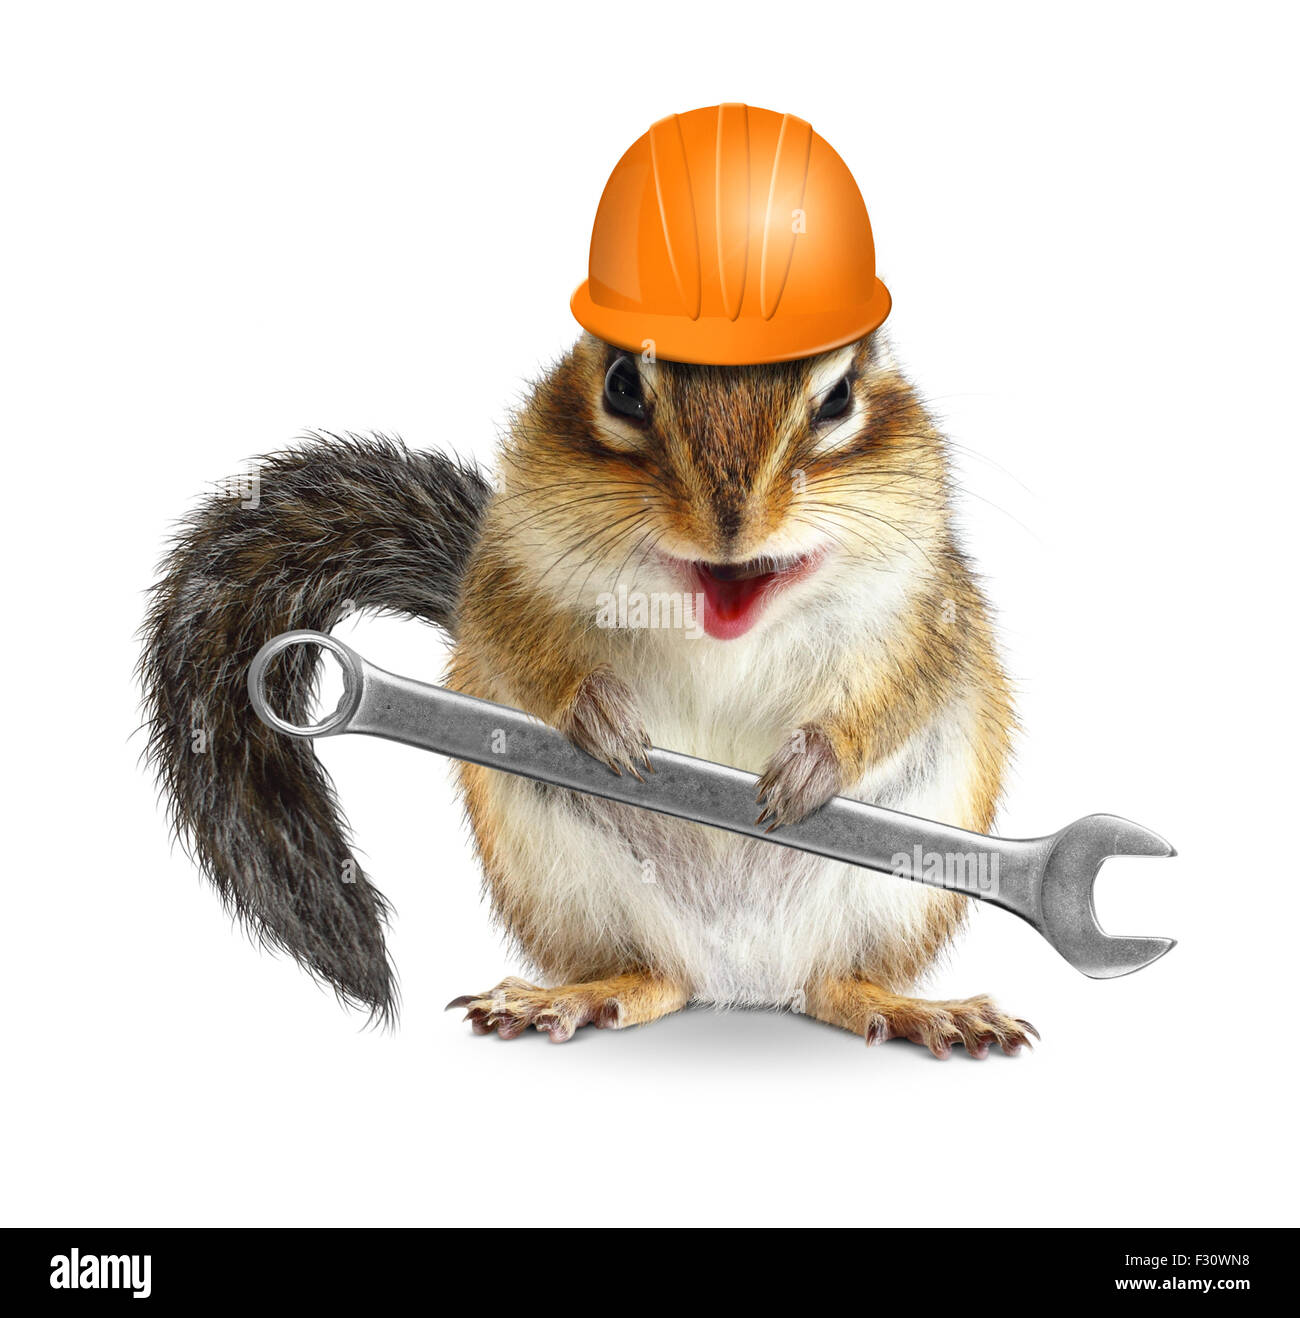 Funny handyman chipmunk worker with helmet and wrench isolated on white background Stock Photo